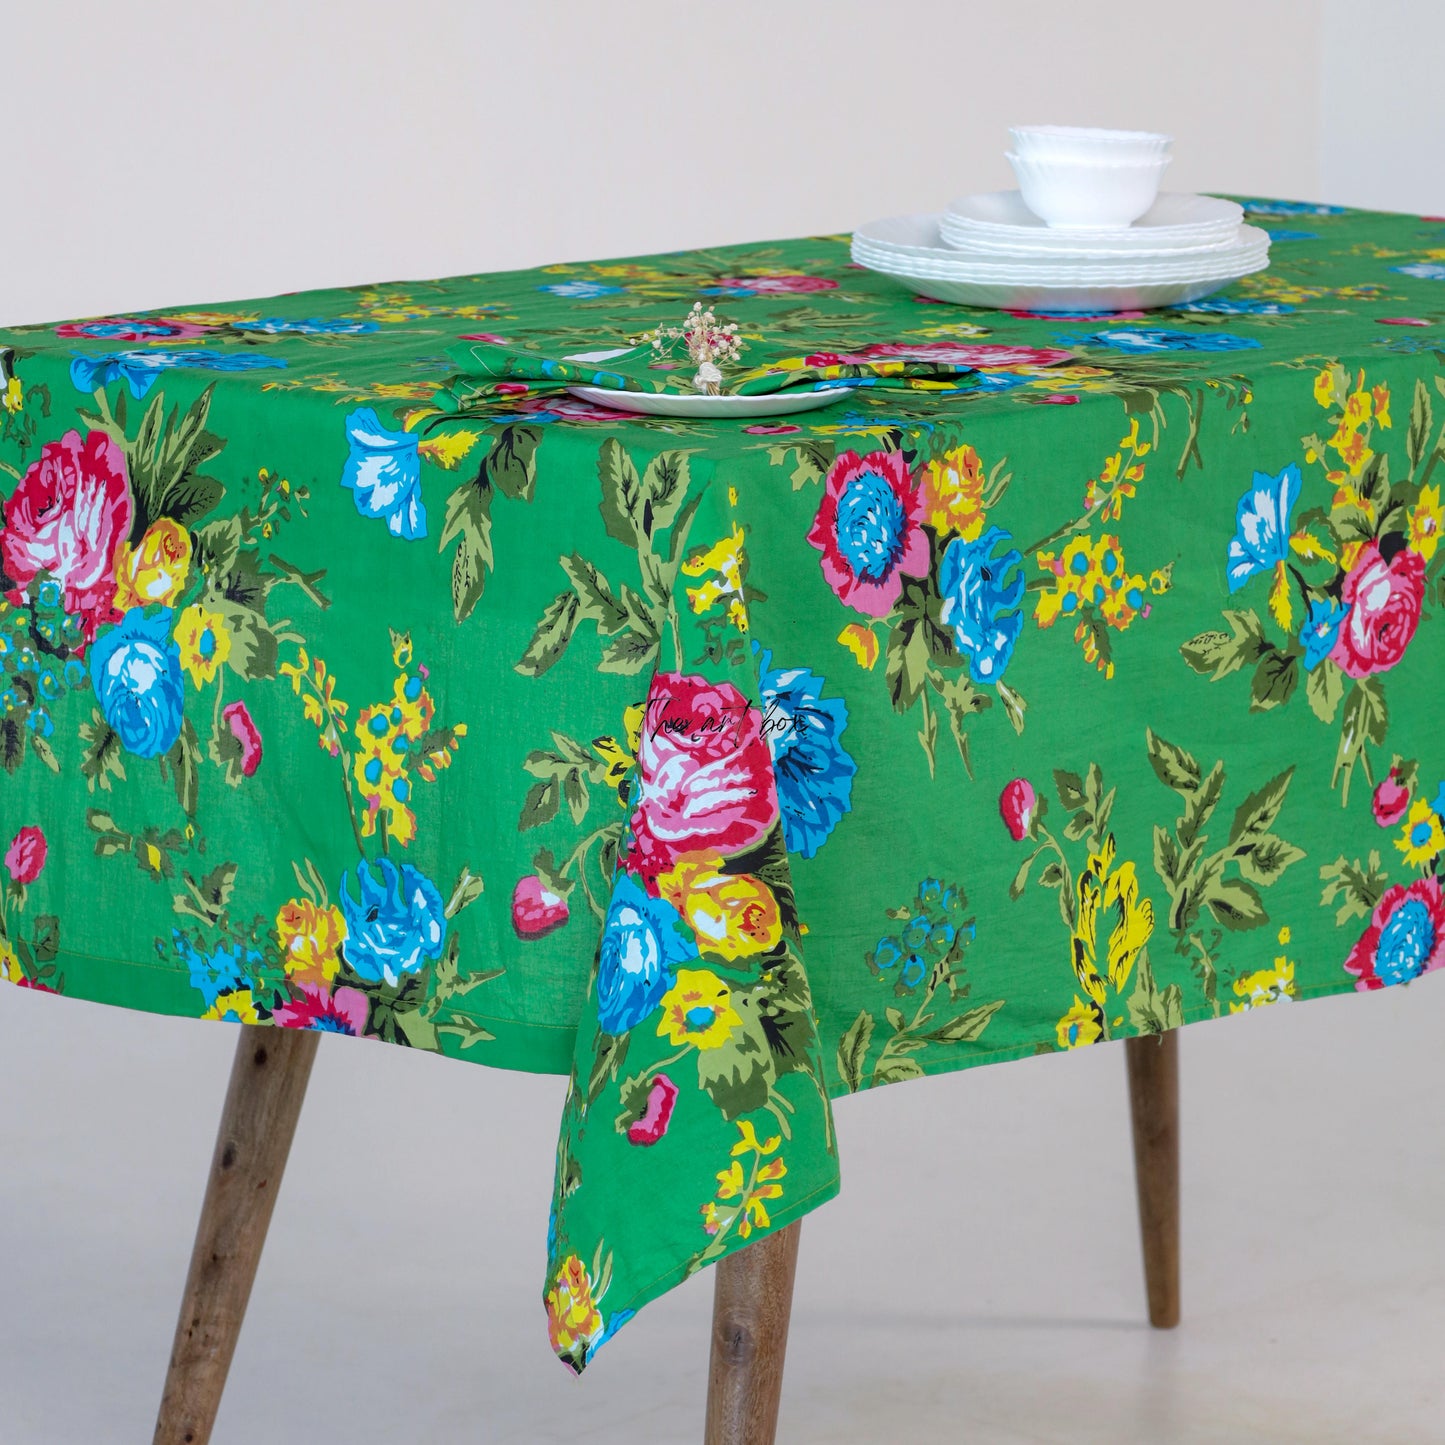 Green Best Printed Table Cloth, Green Floral Printed Cotton Table Cover